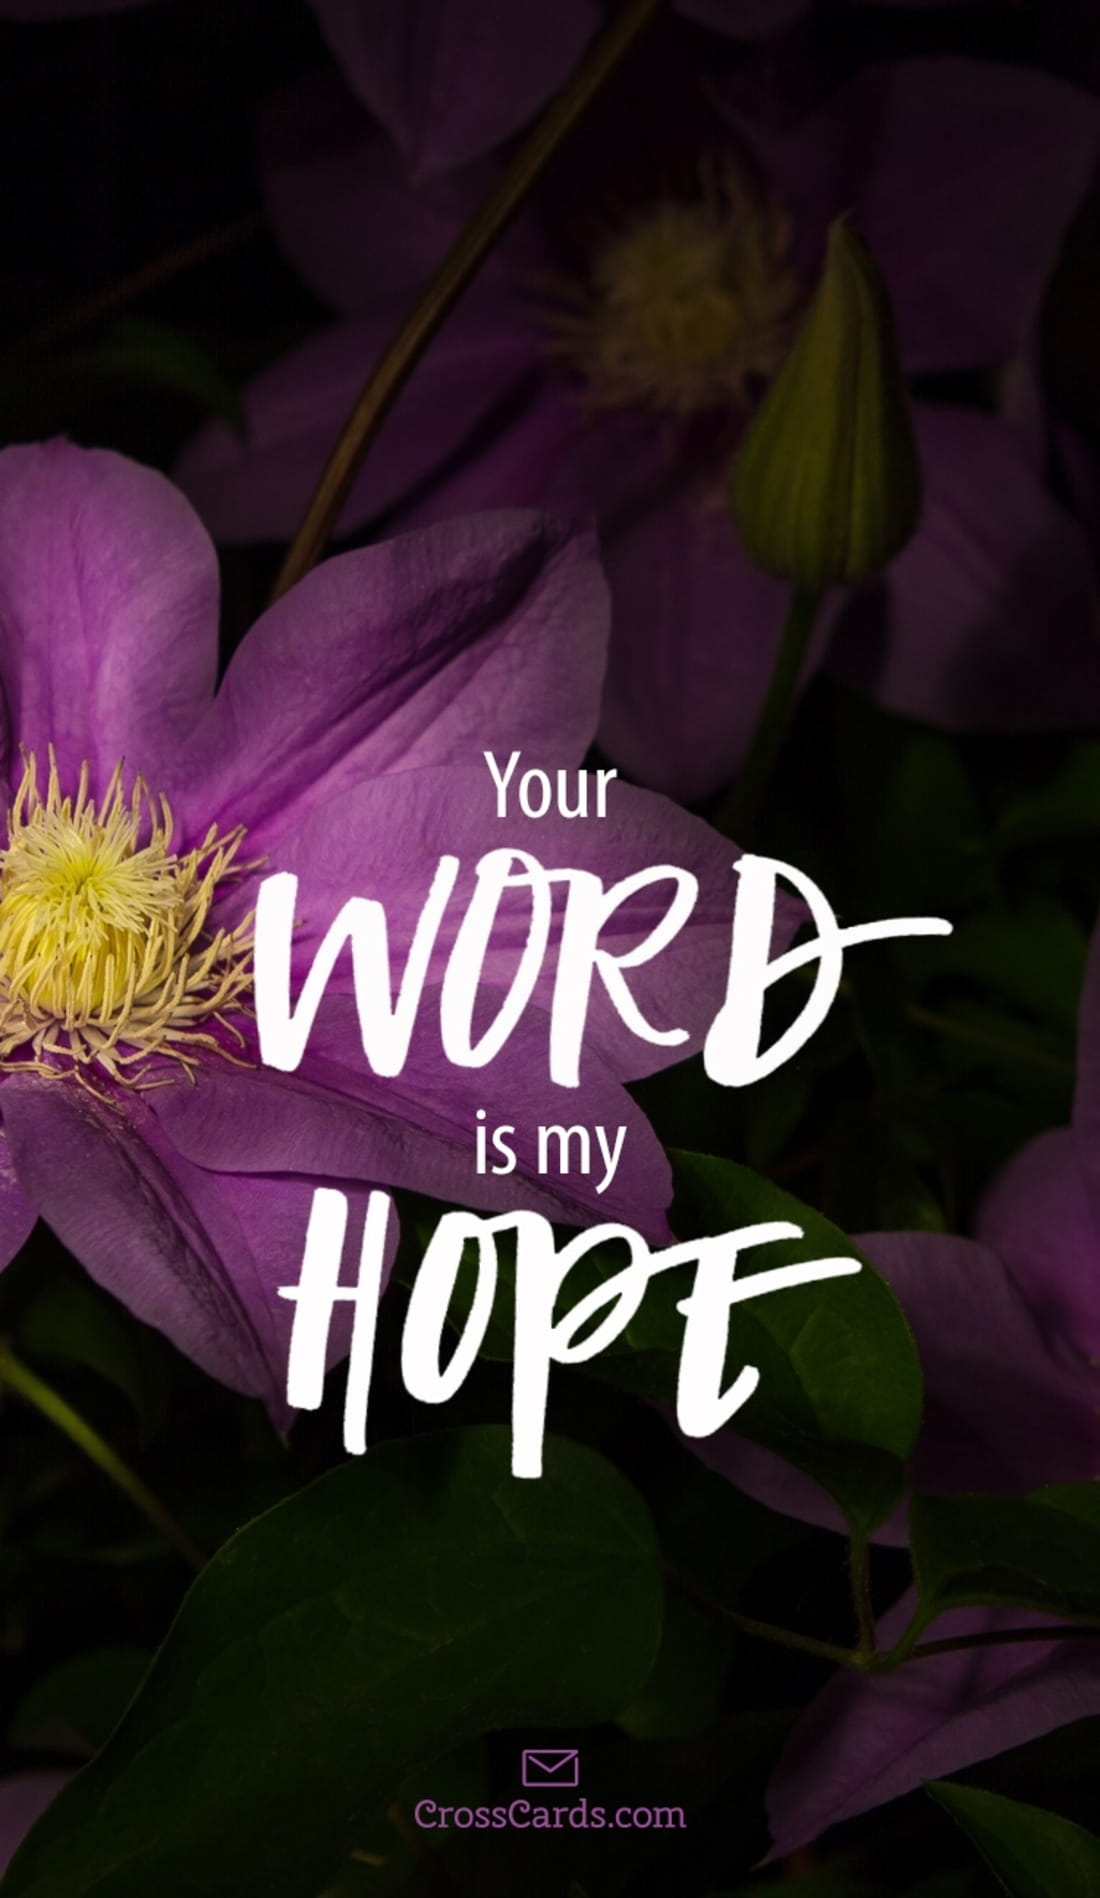 Your Word is My Hope mobile phone wallpaper